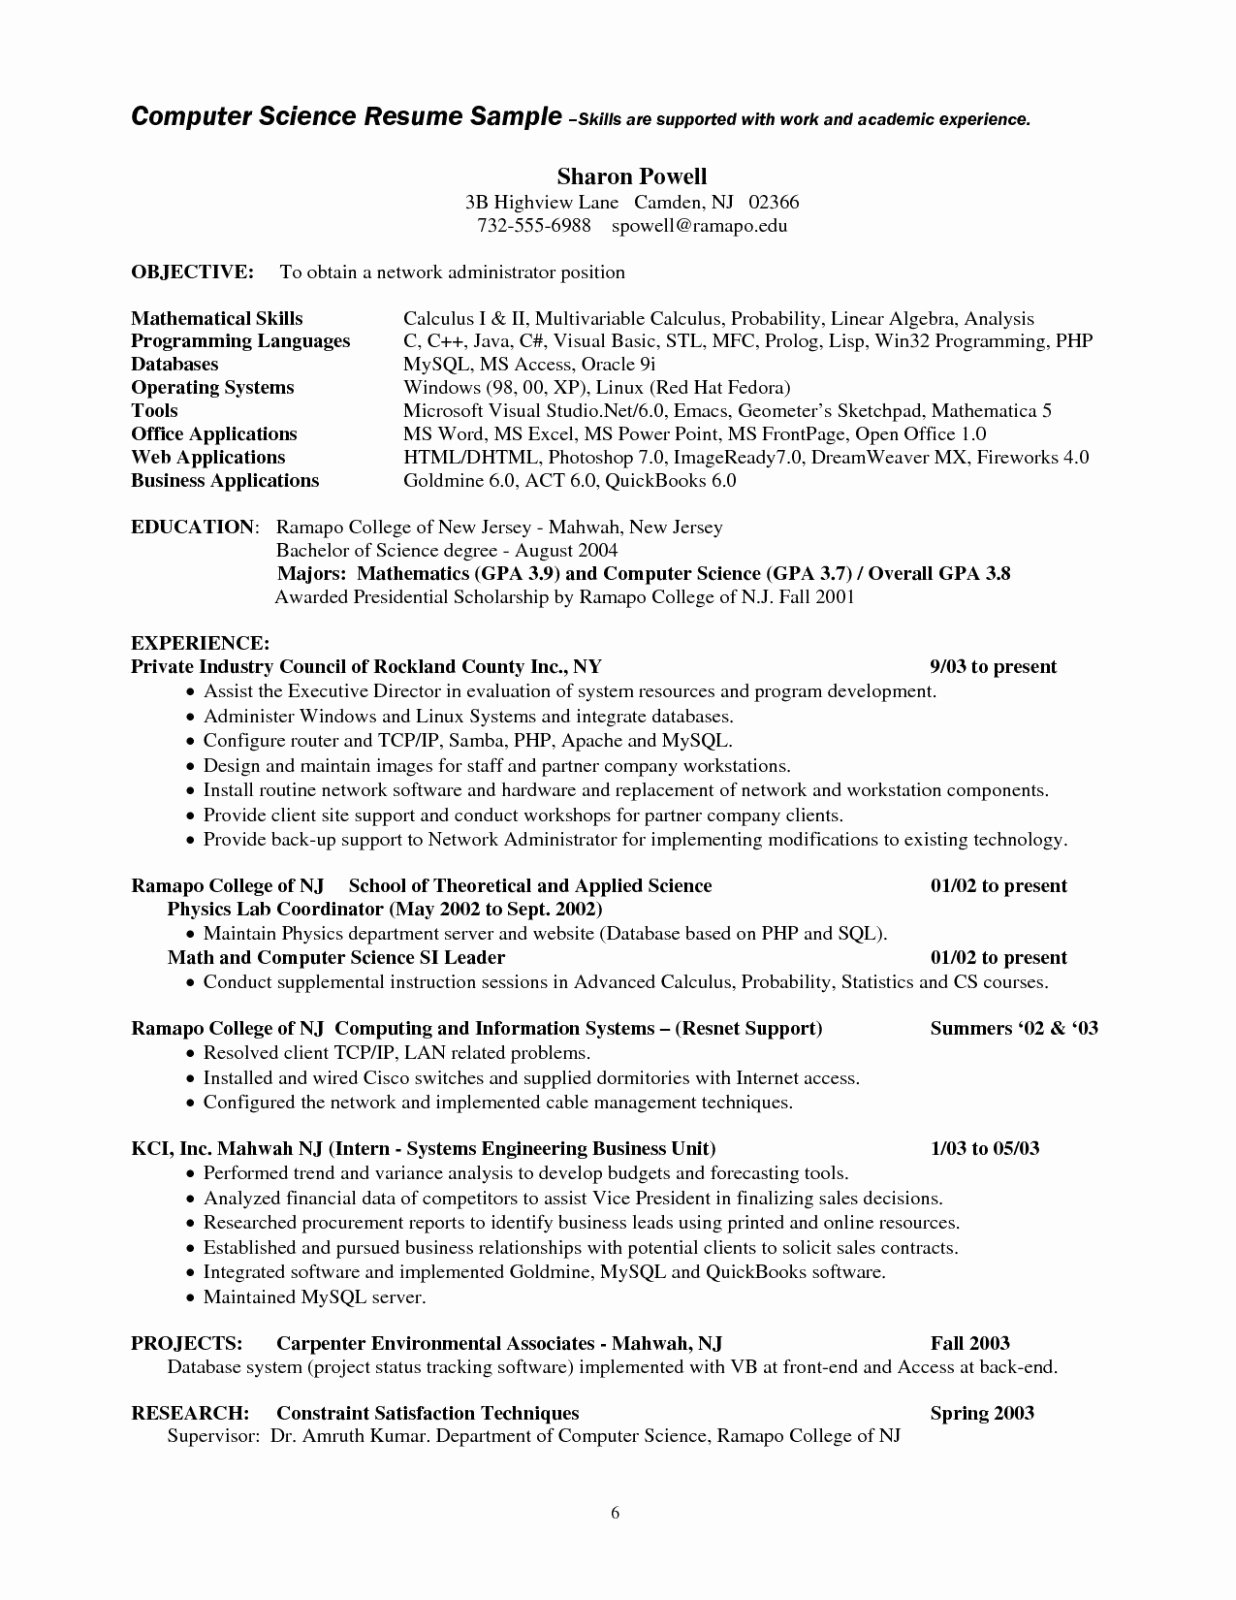 Computer Science Resume Template Inspirational Puter Science Resume Example